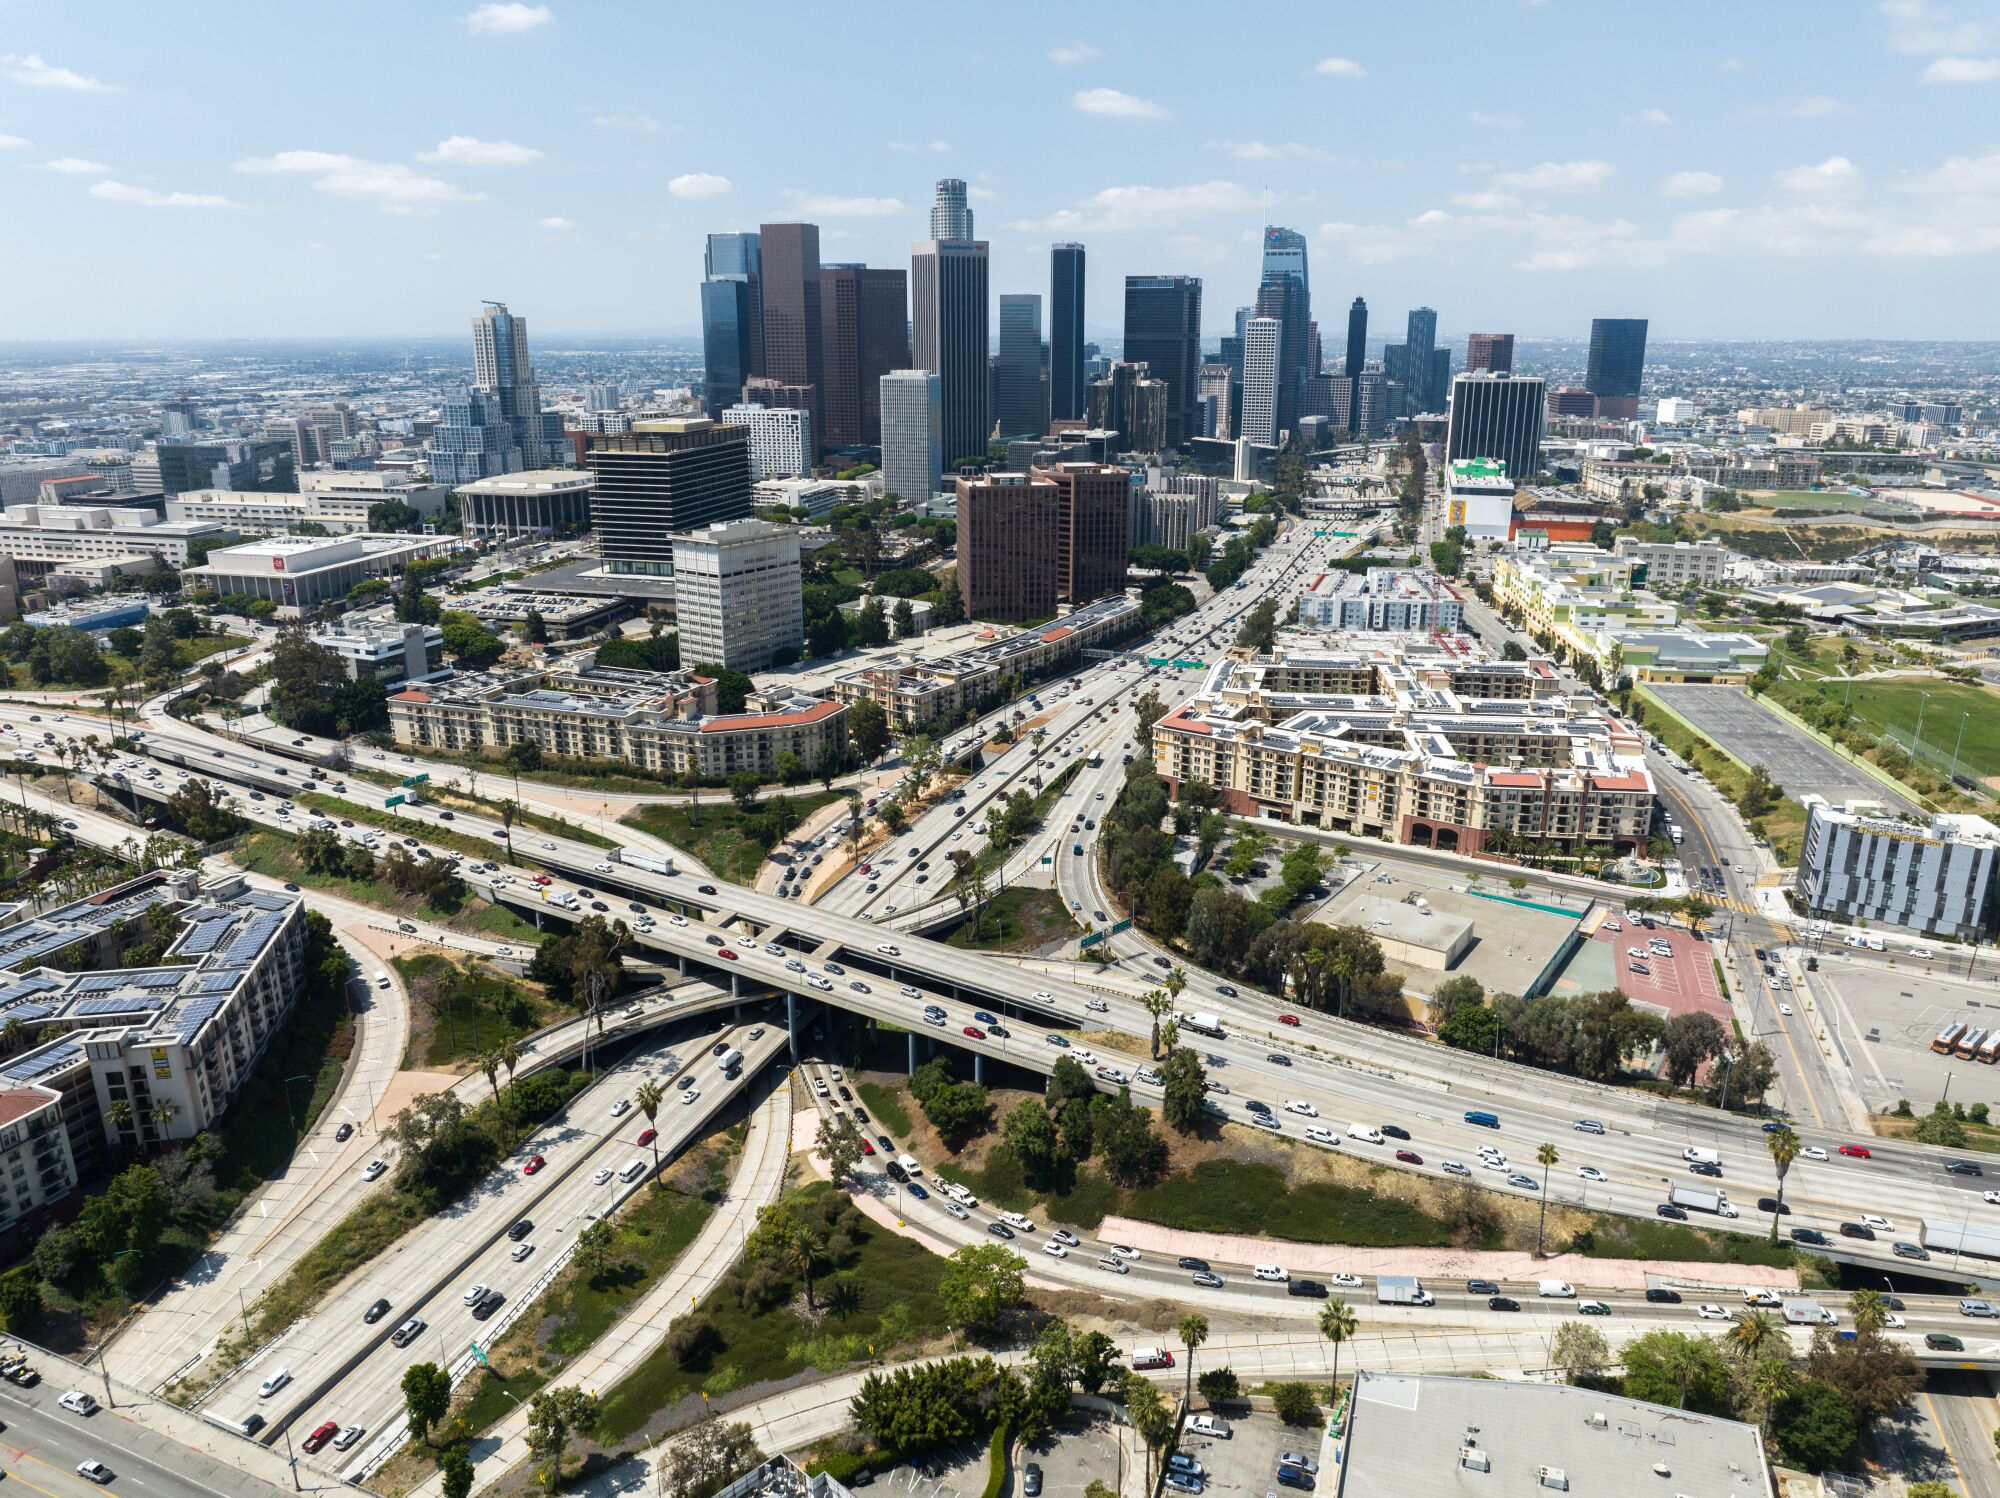 Los Angeles skyline and the four-level interchange where the 110 and 101 freeways meet.